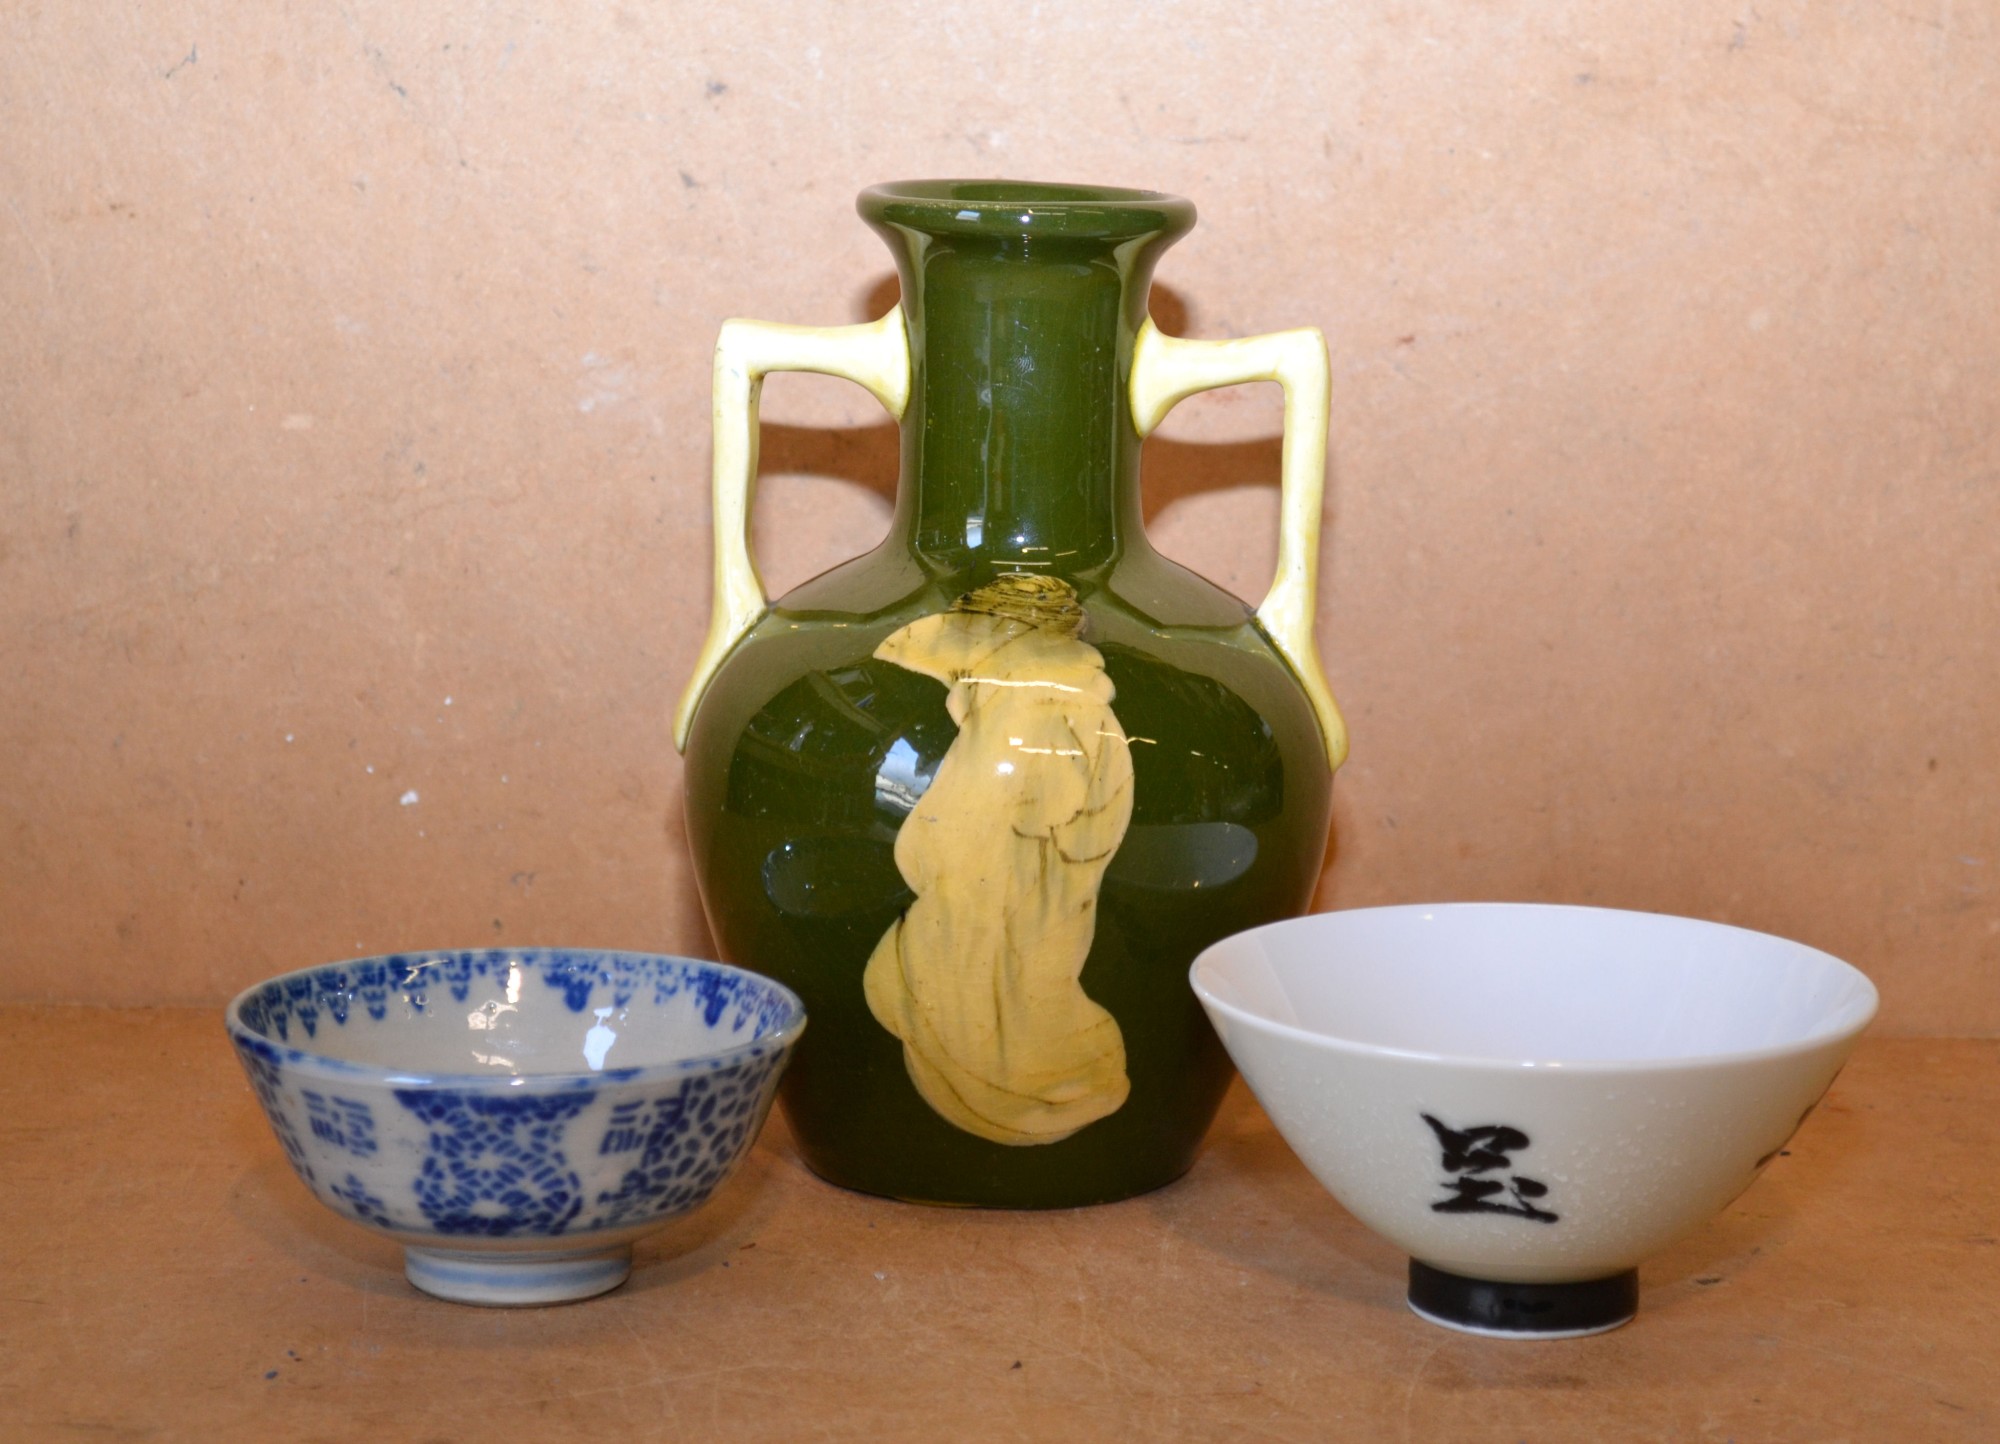 A Glazed Earthenware Bulbous 2-Handled Thin Necked Vase on green and white ground with Oriental